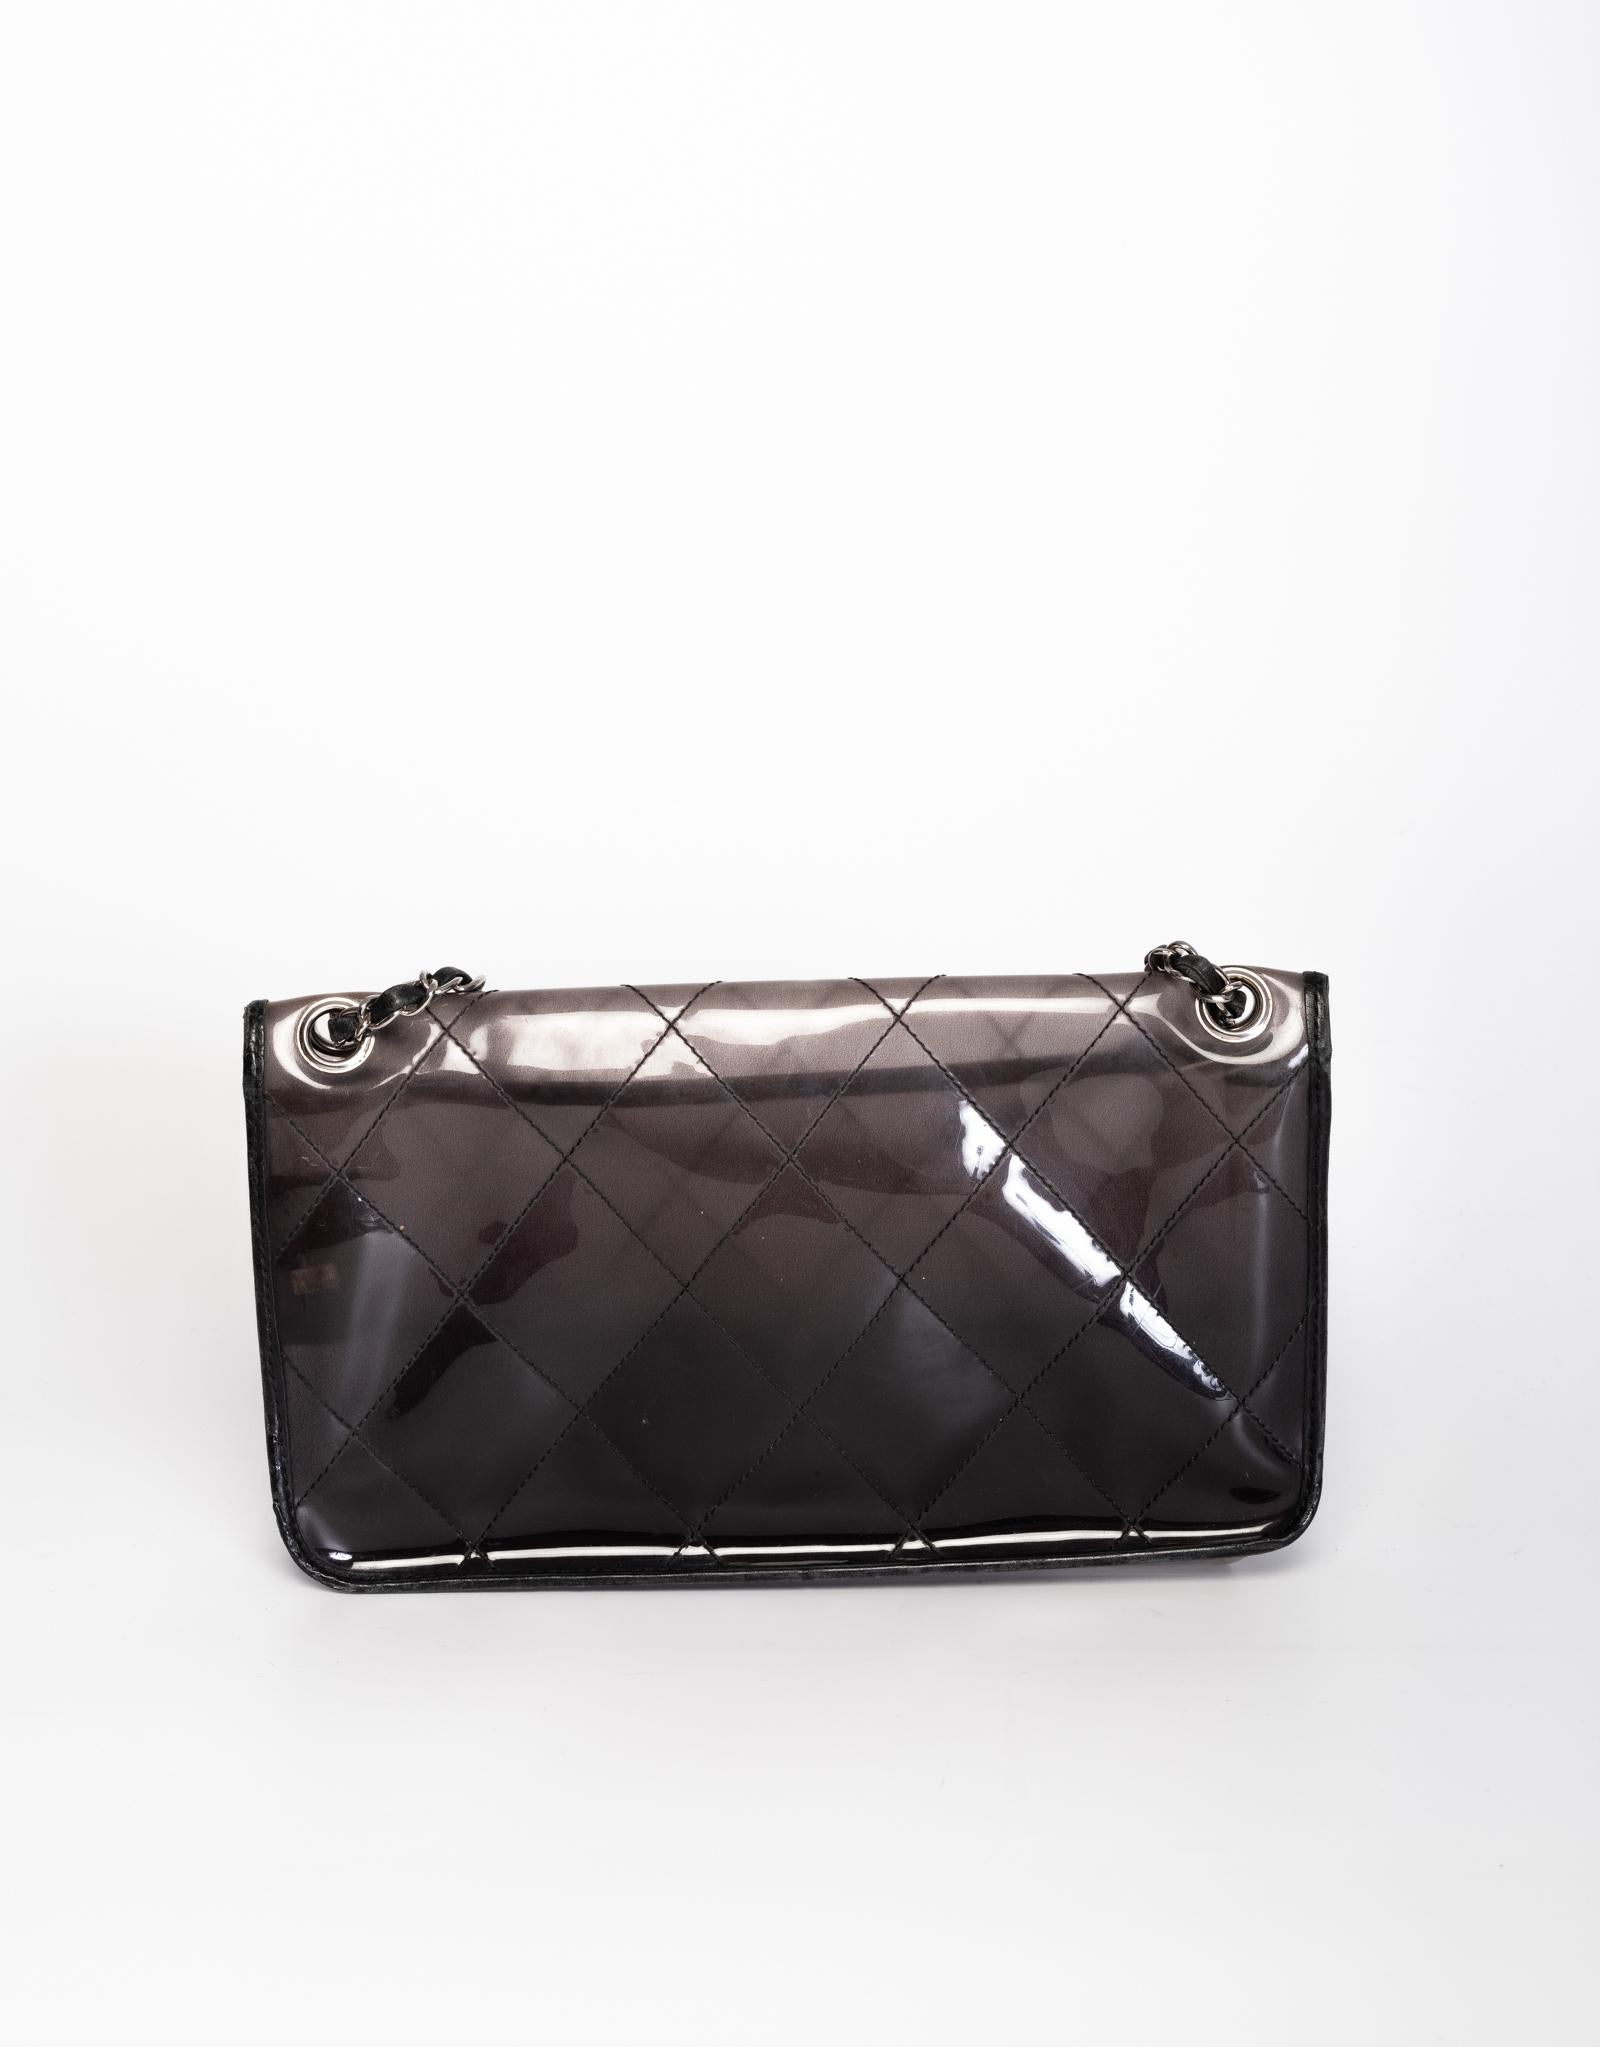 This unique Chanel classic flap bag is made of vinyl with a smokey black ombre (gradient) color with signature diamond quilted stitching. Featuring sliver tone hardware, a front flap with the signature interlocking CC turn lock closure, a sliver